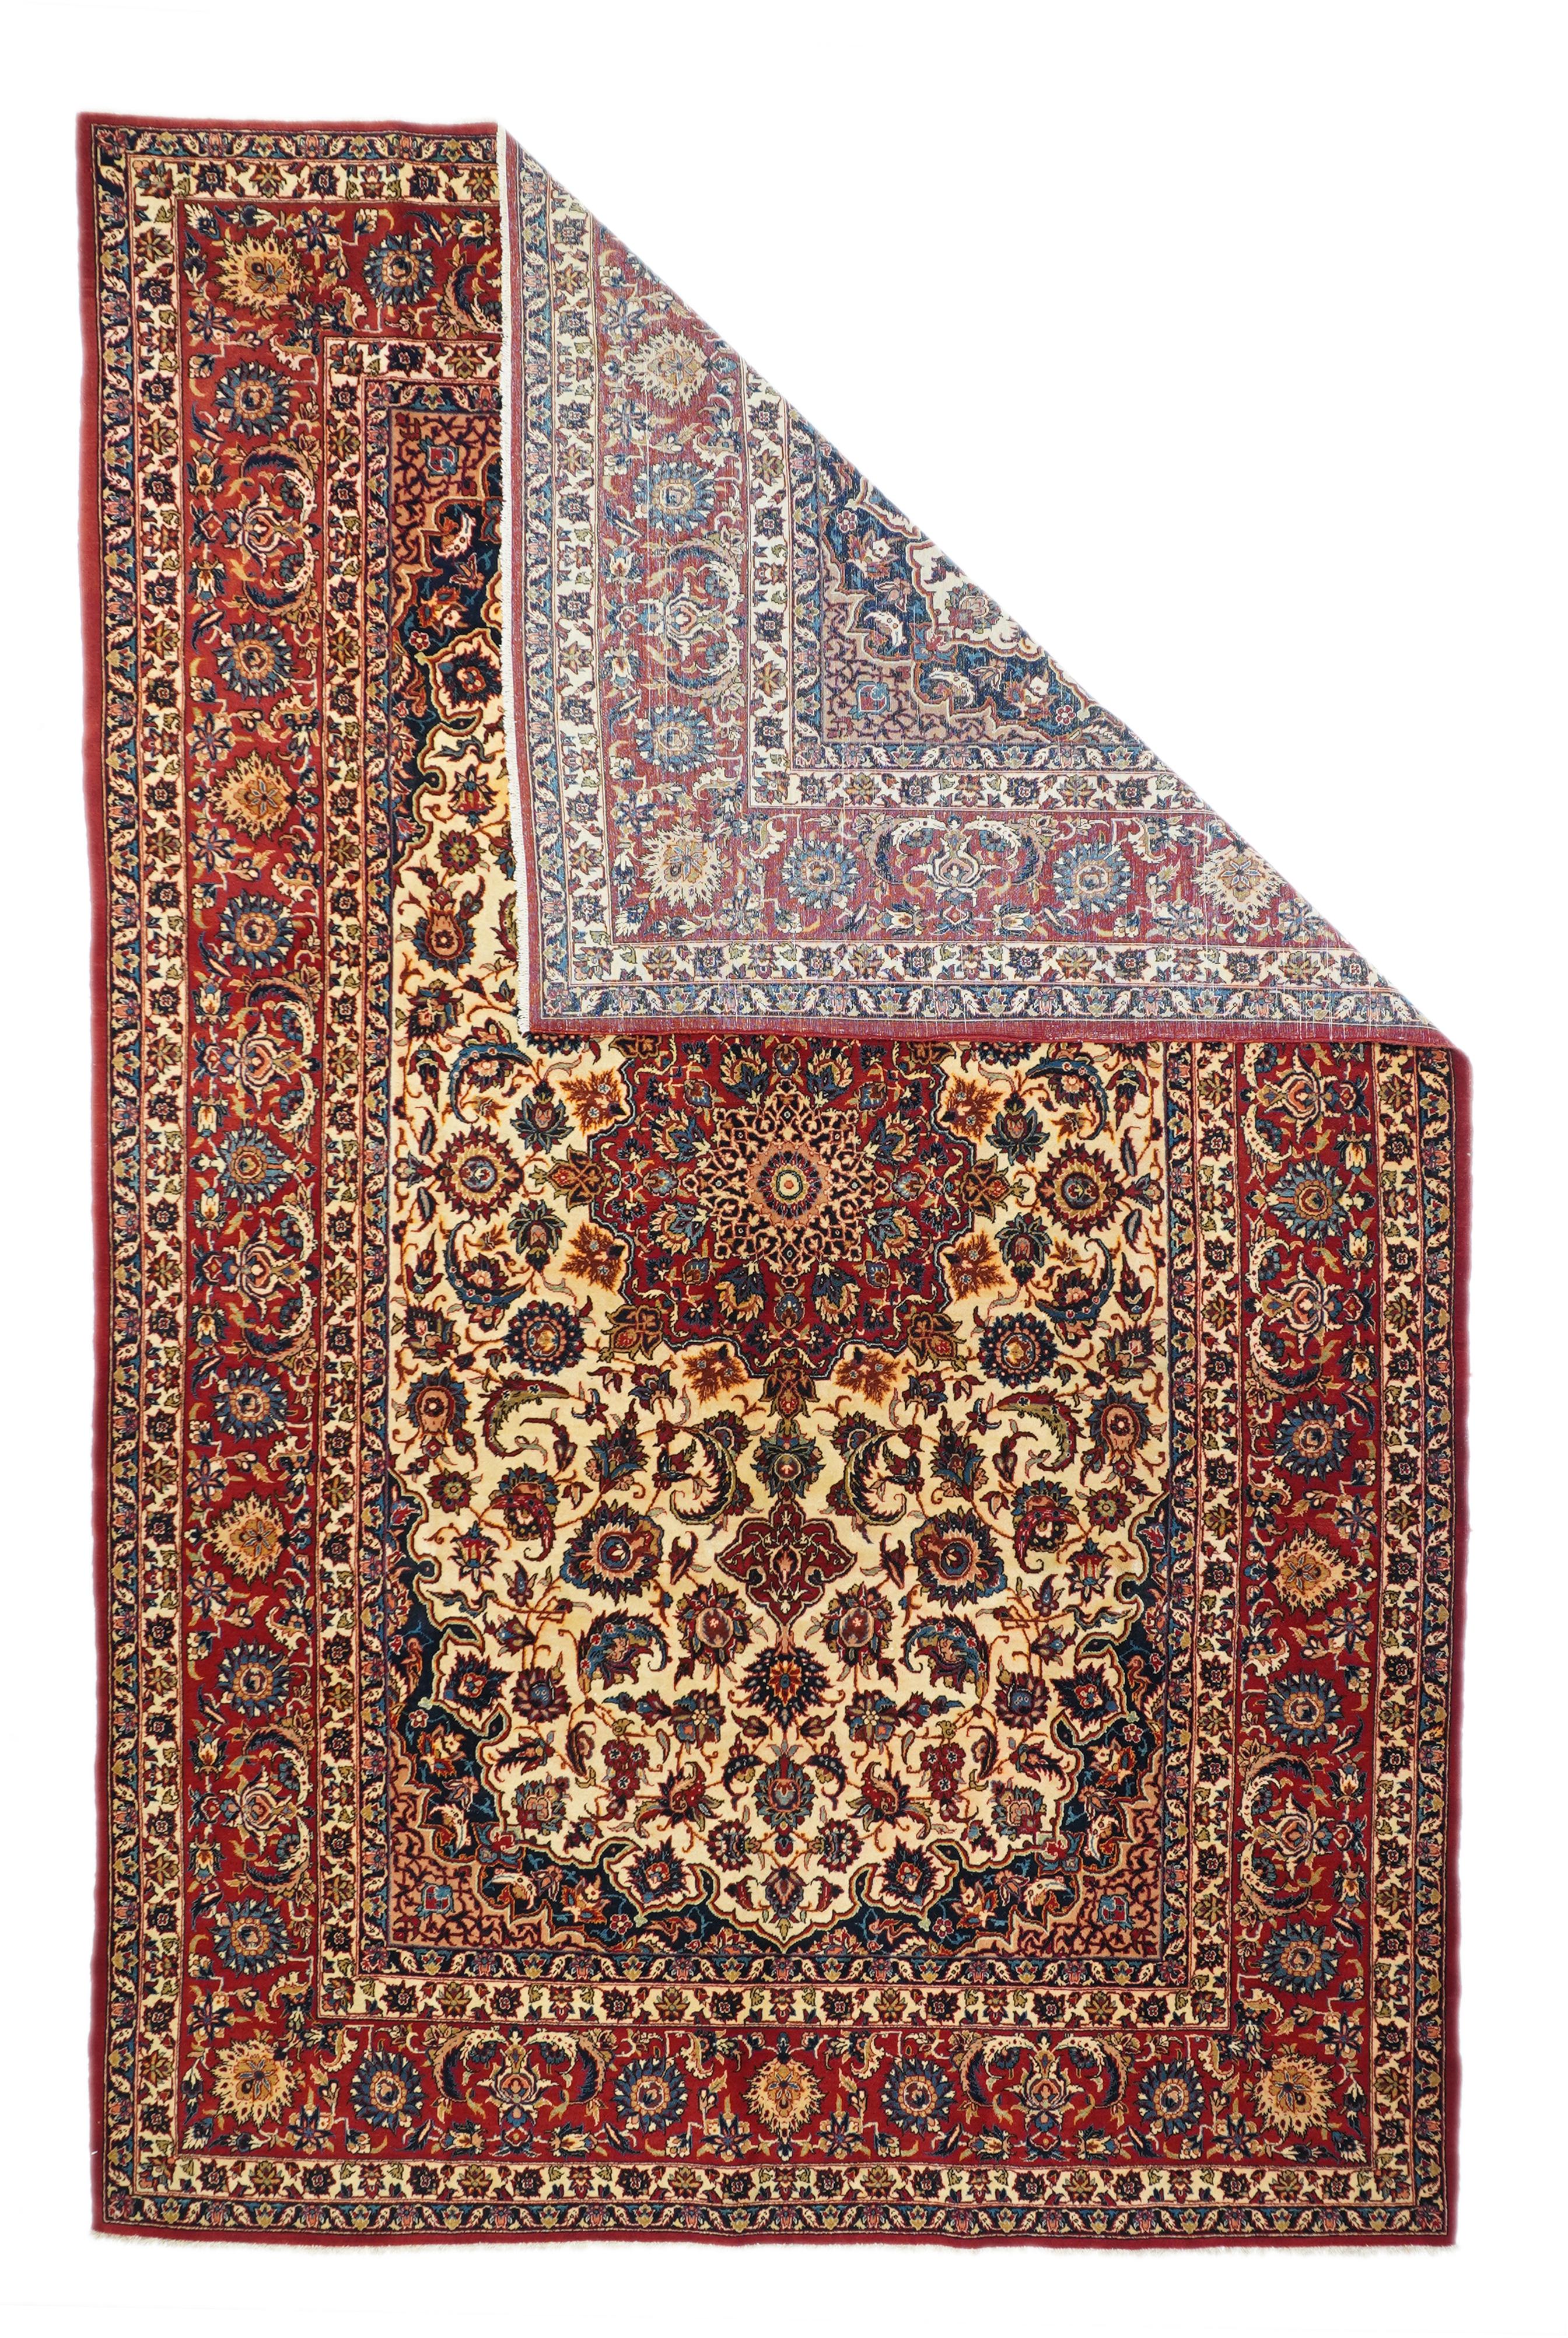 cLASSICALLY iSFAHAN rEVIVAL, WITH AN ELLIPTICAL CREAM FIELD CENTRED BY A RED 8-POINT STAR MEDALLION, CLOSELY SUPPORTED BY VINERY AND PALMETTES THAT SHRINK TOWARDS THE FIELD ENDS. nAVY EXTENDED CORNERS. rED BORDER WITH PAIRED SICKLE LEAVES, OVAL